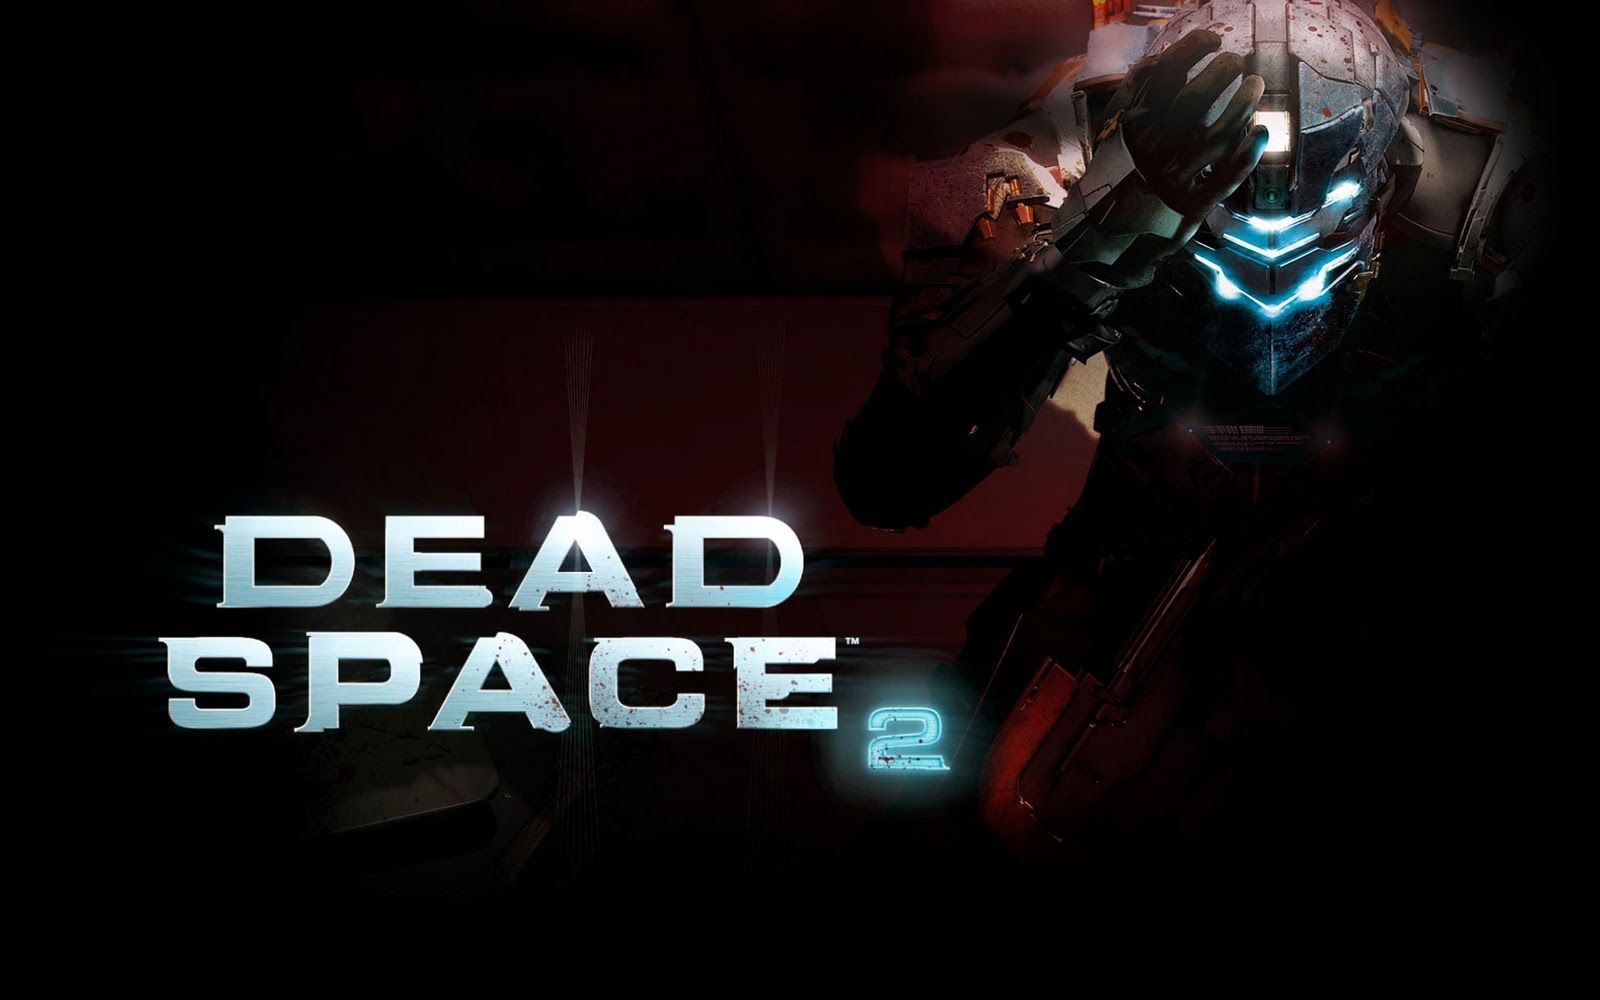 Dead Space 2 Wallpaper Hd - HD Wallpapers and Pictures